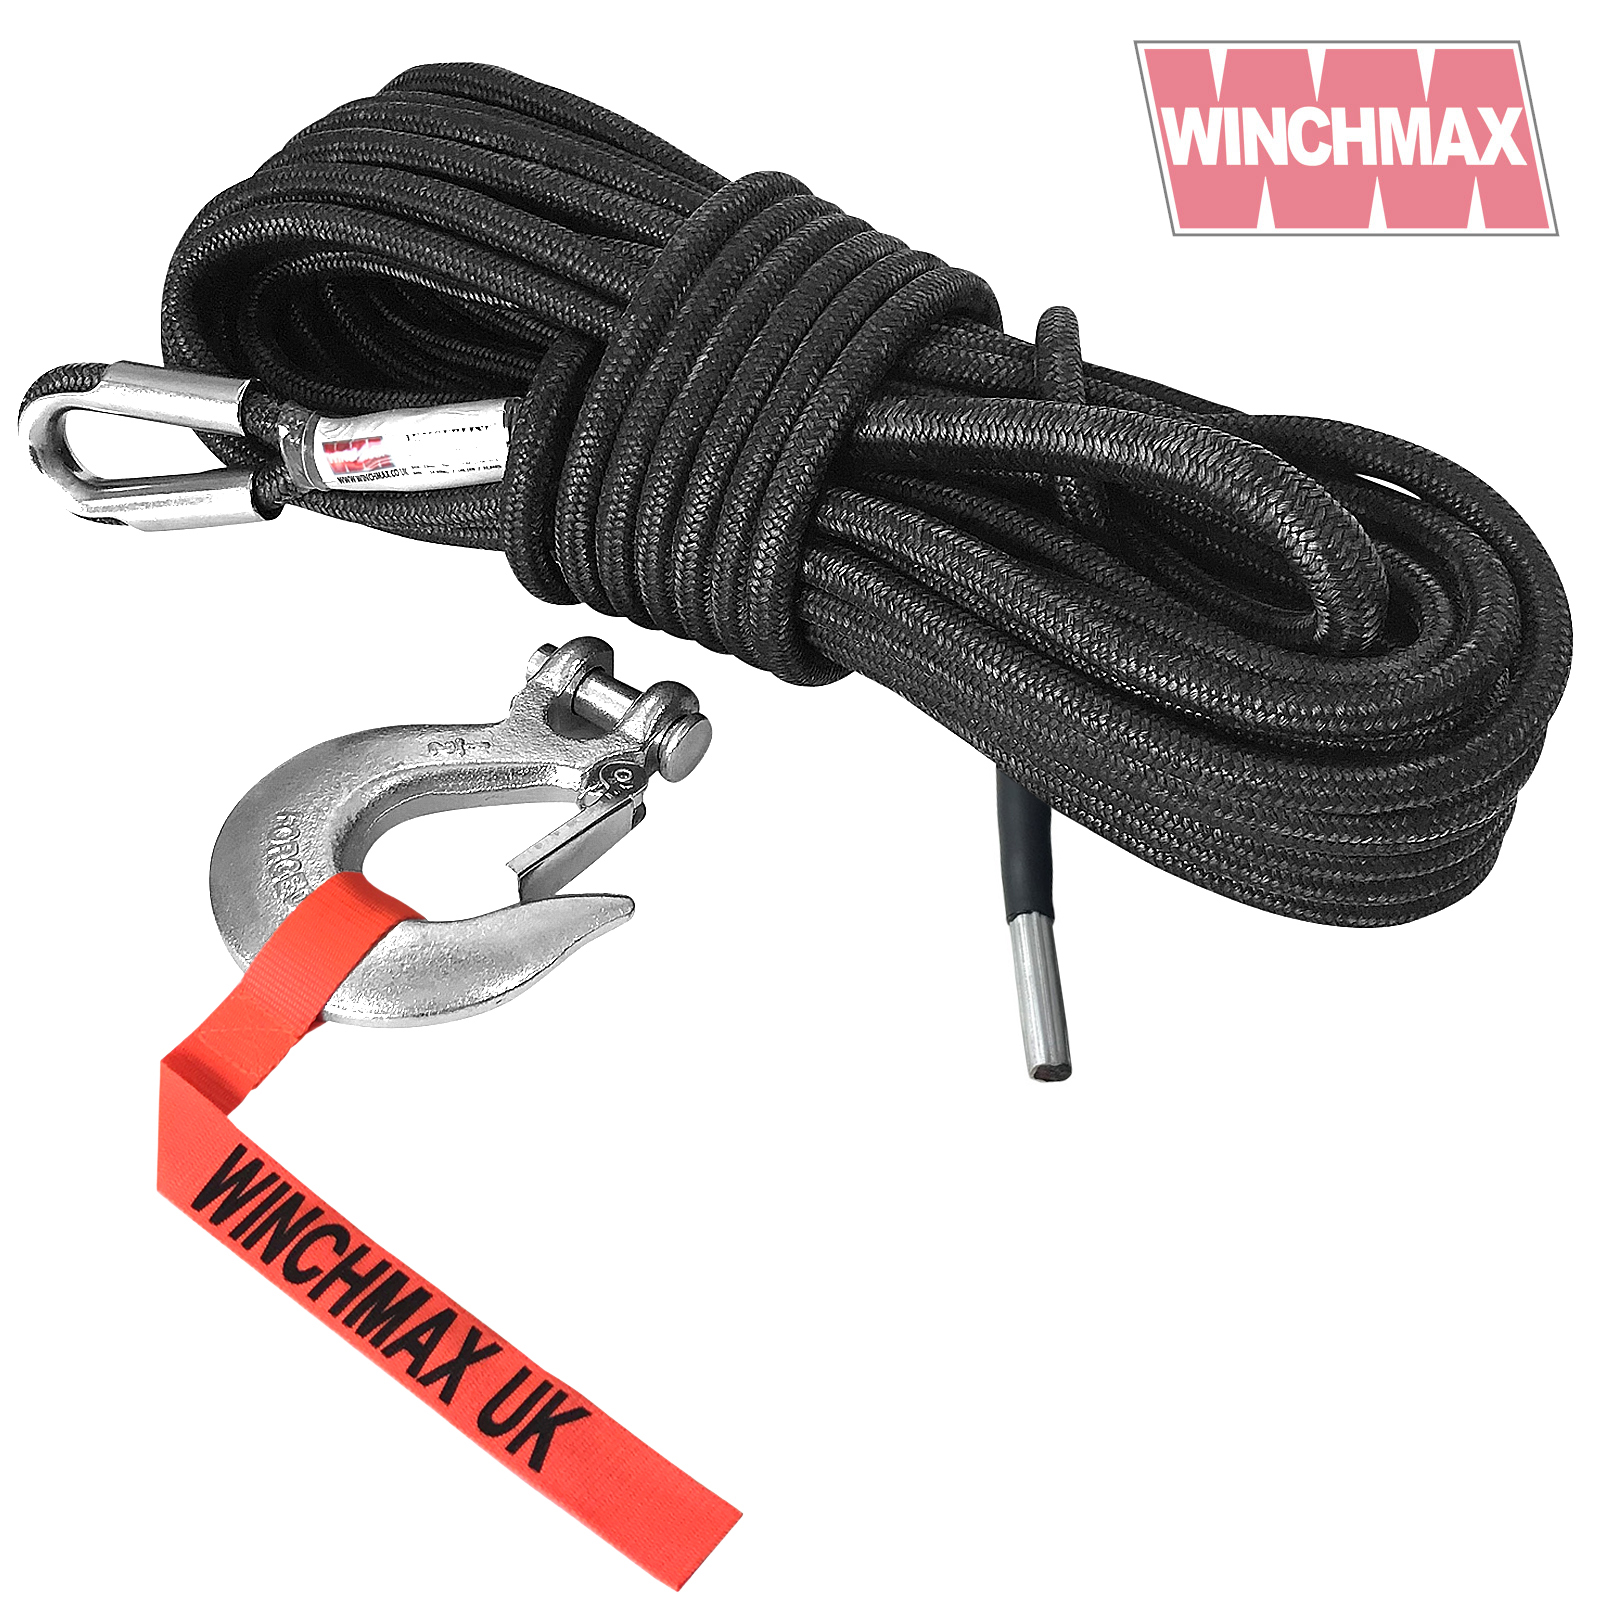 Armourline Synthetic Rope 20m x 15.5mm, Hole Fix. 1/2 Inch Clevis Hook. -  Winchmax